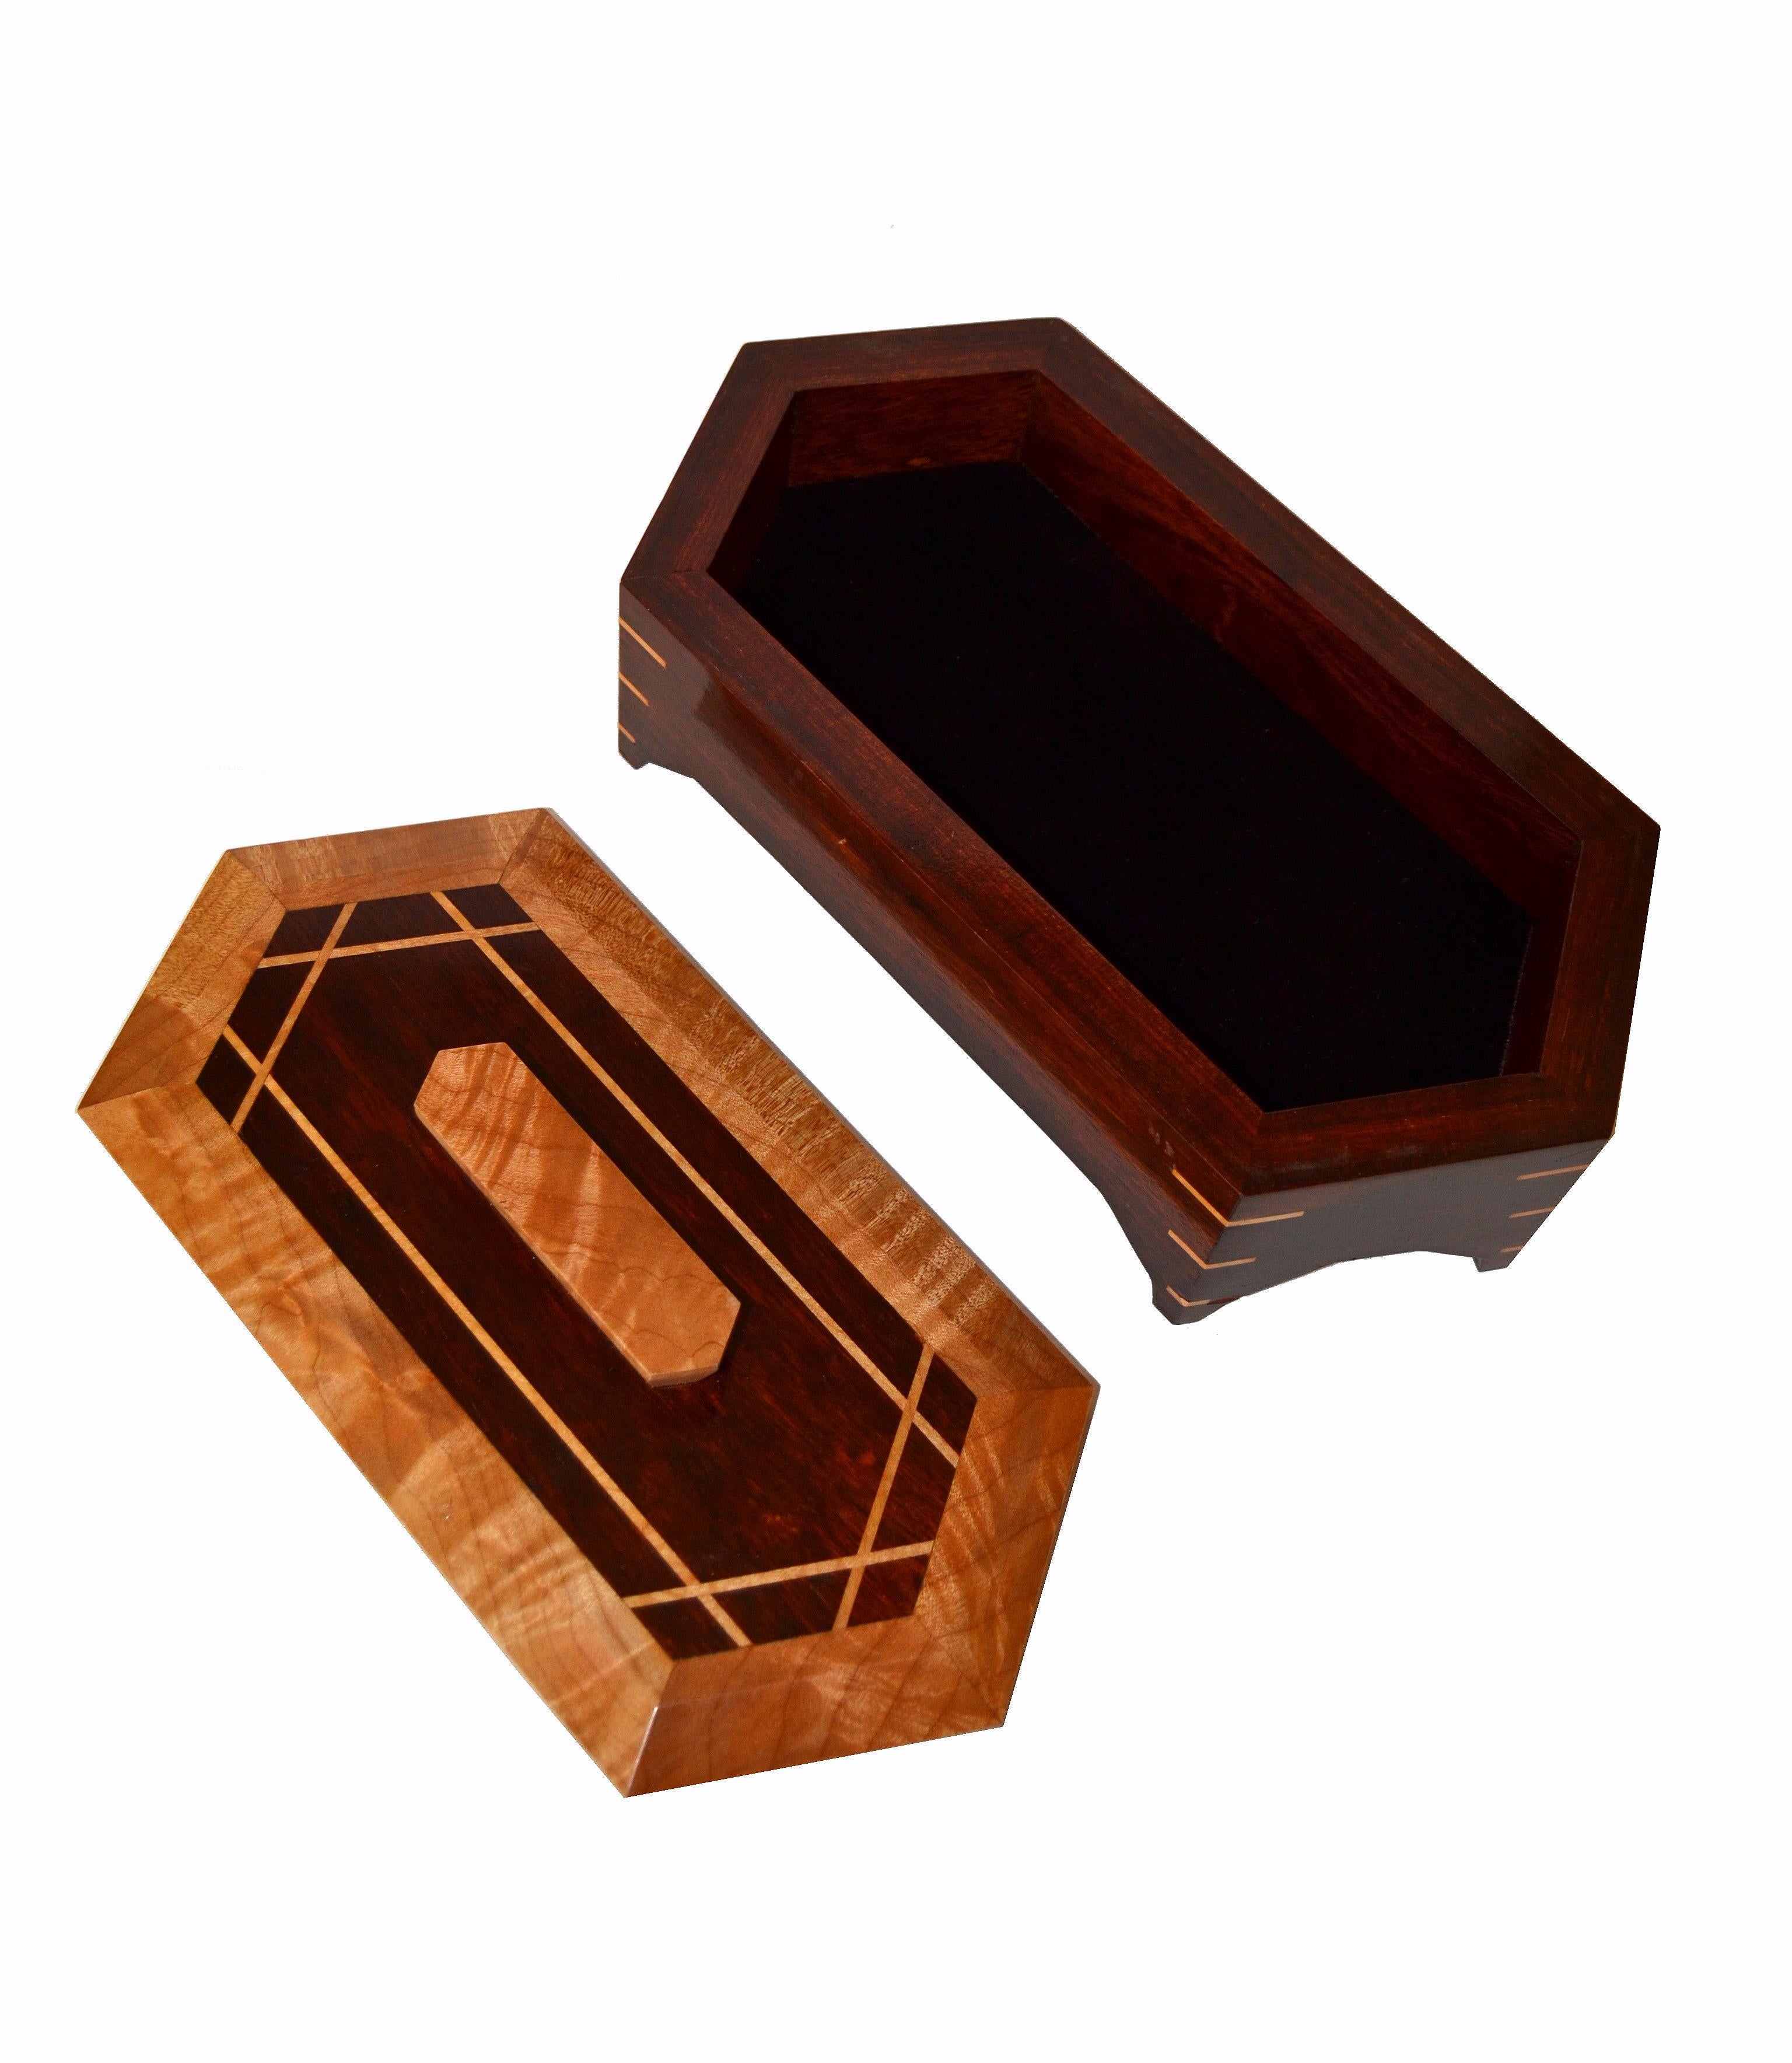 American Vintage Two-Tone Handcrafted Decorative Mahogany Keepsake Wooden Box with Lid